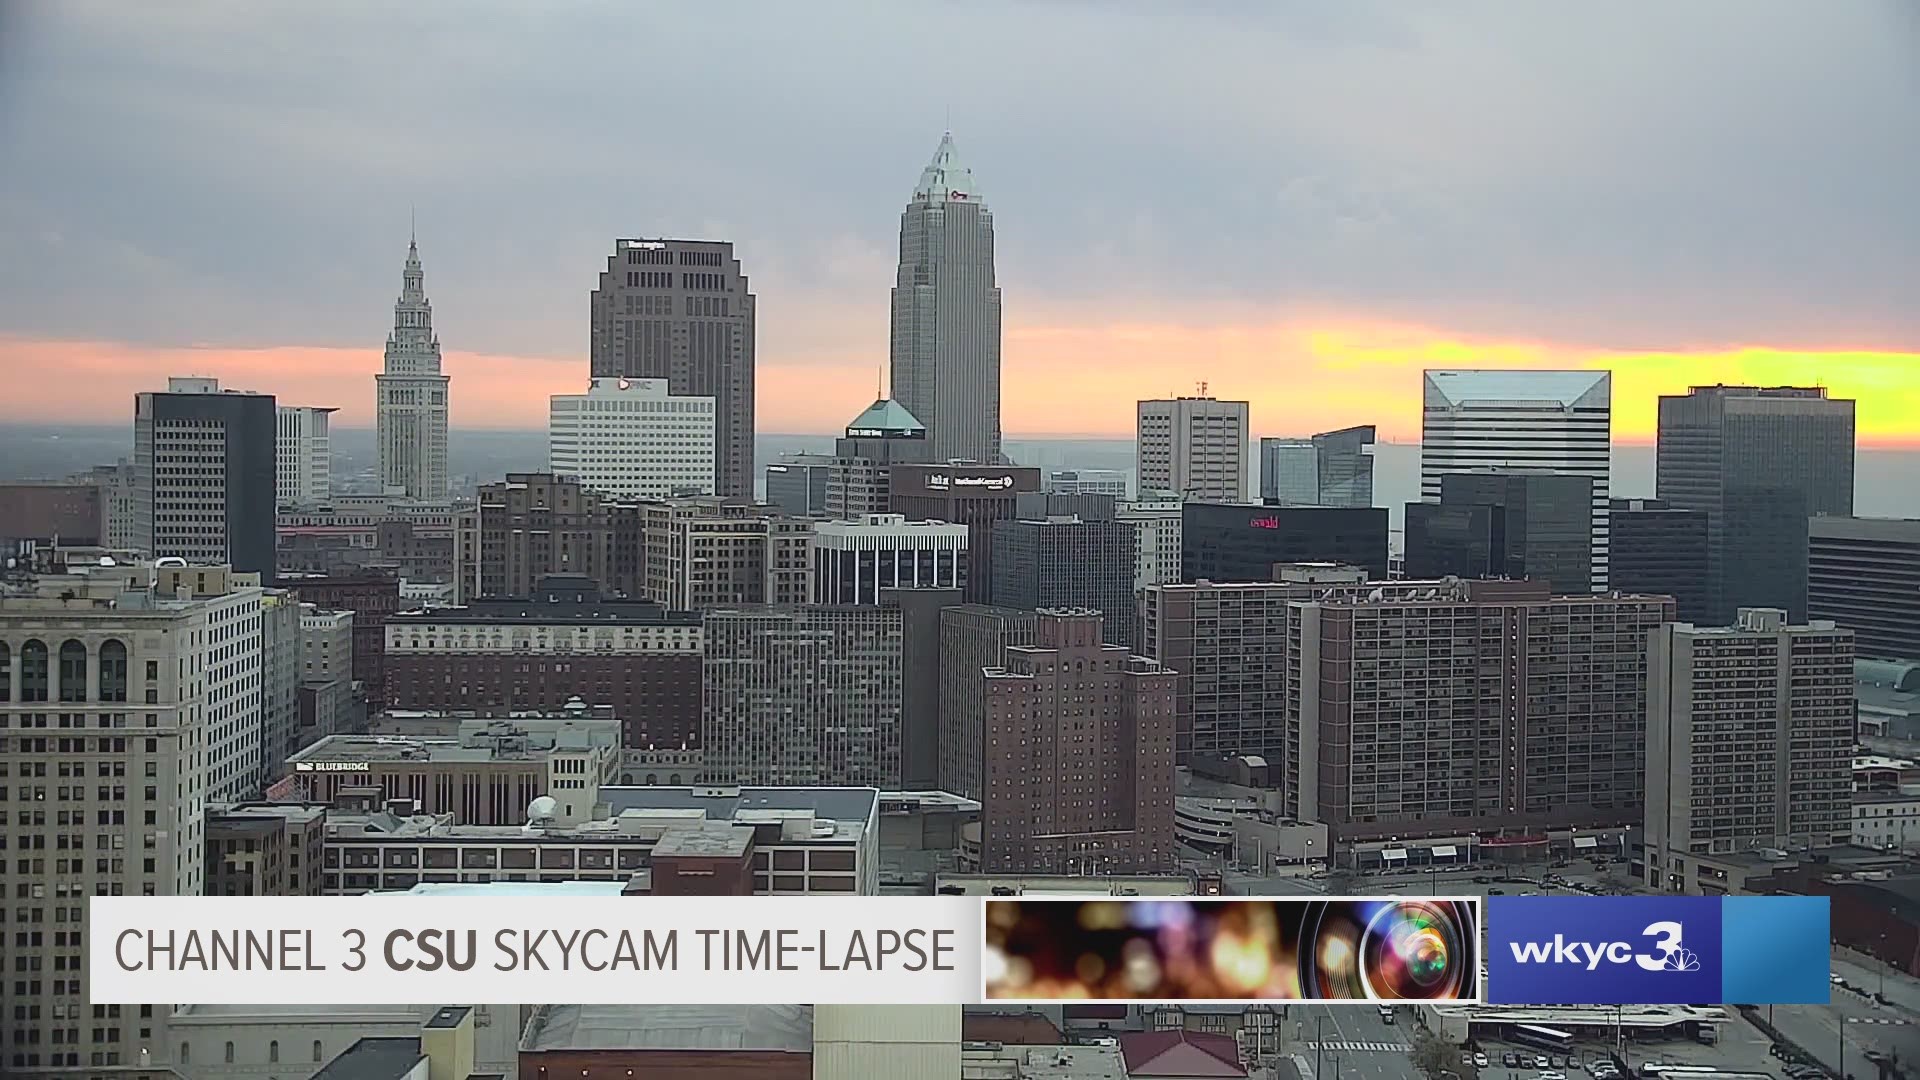 We captured the Mammatus clouds over downtown Cleveland earlier this evening (4/17/19) on the Channel 3 CSU Skycam weather time-lapse, indicating lots of turbulence in the air above us. #3weather